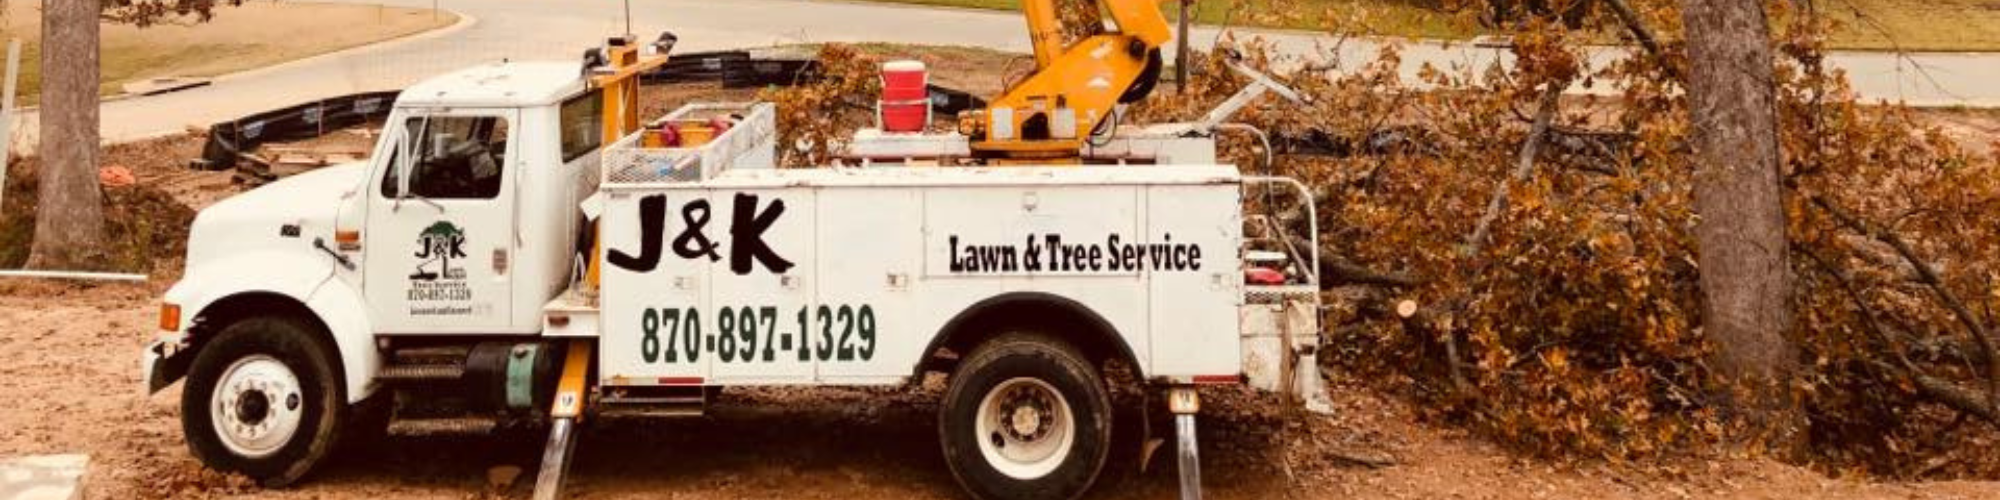 J&K Lawn & Tree service truck at tree removal site